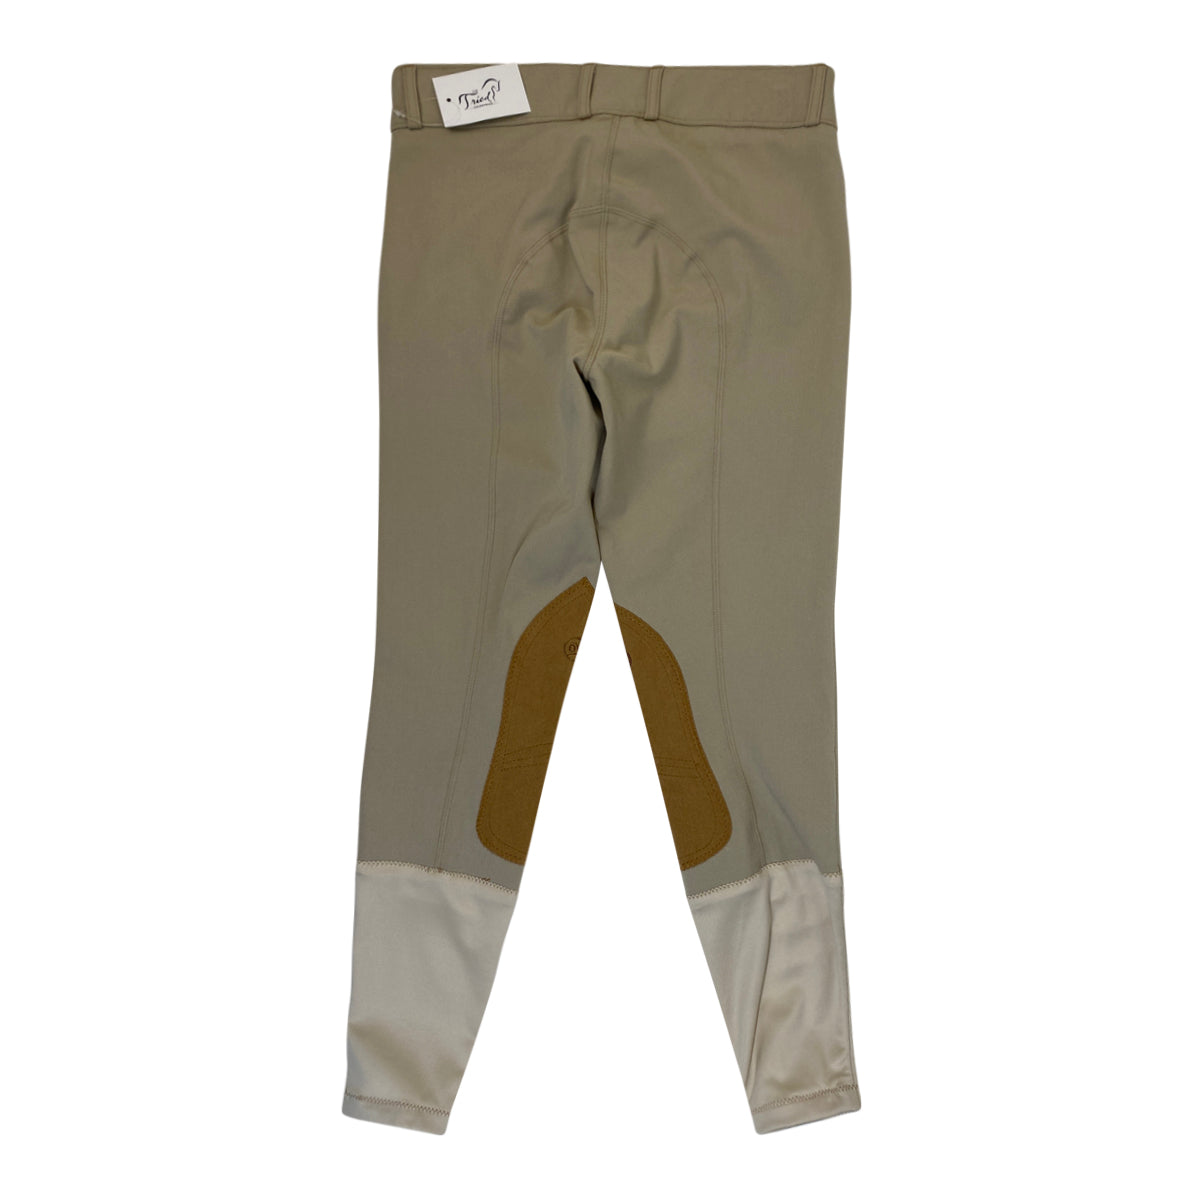 Ovation 'Taylored' EuroWeave Knee Patch Breeches in Tan